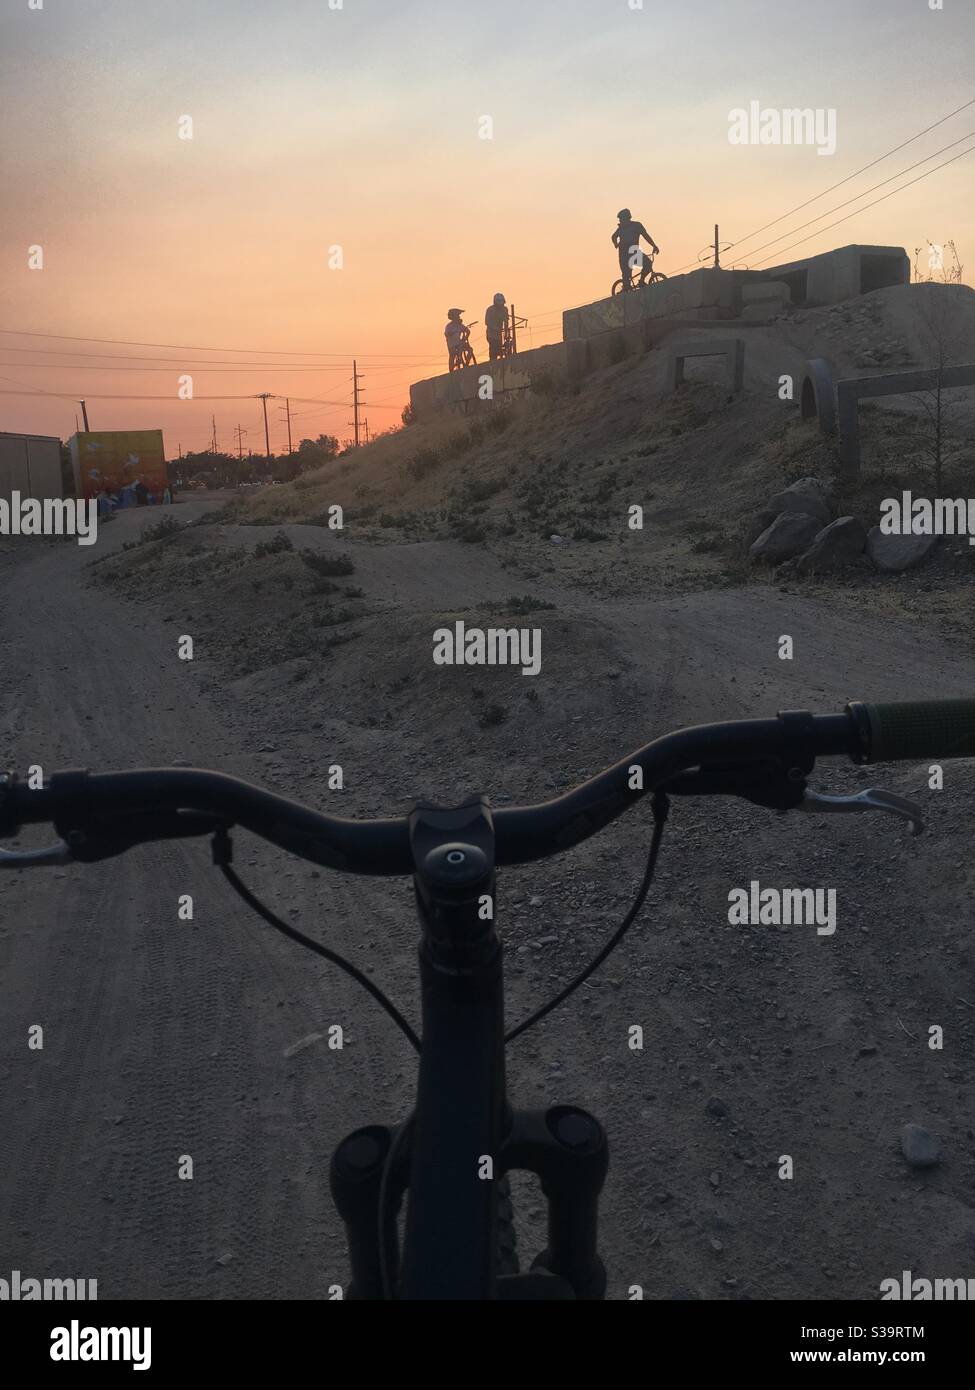 Mountain bikers at sunset shot over the handle bars. Stock Photo